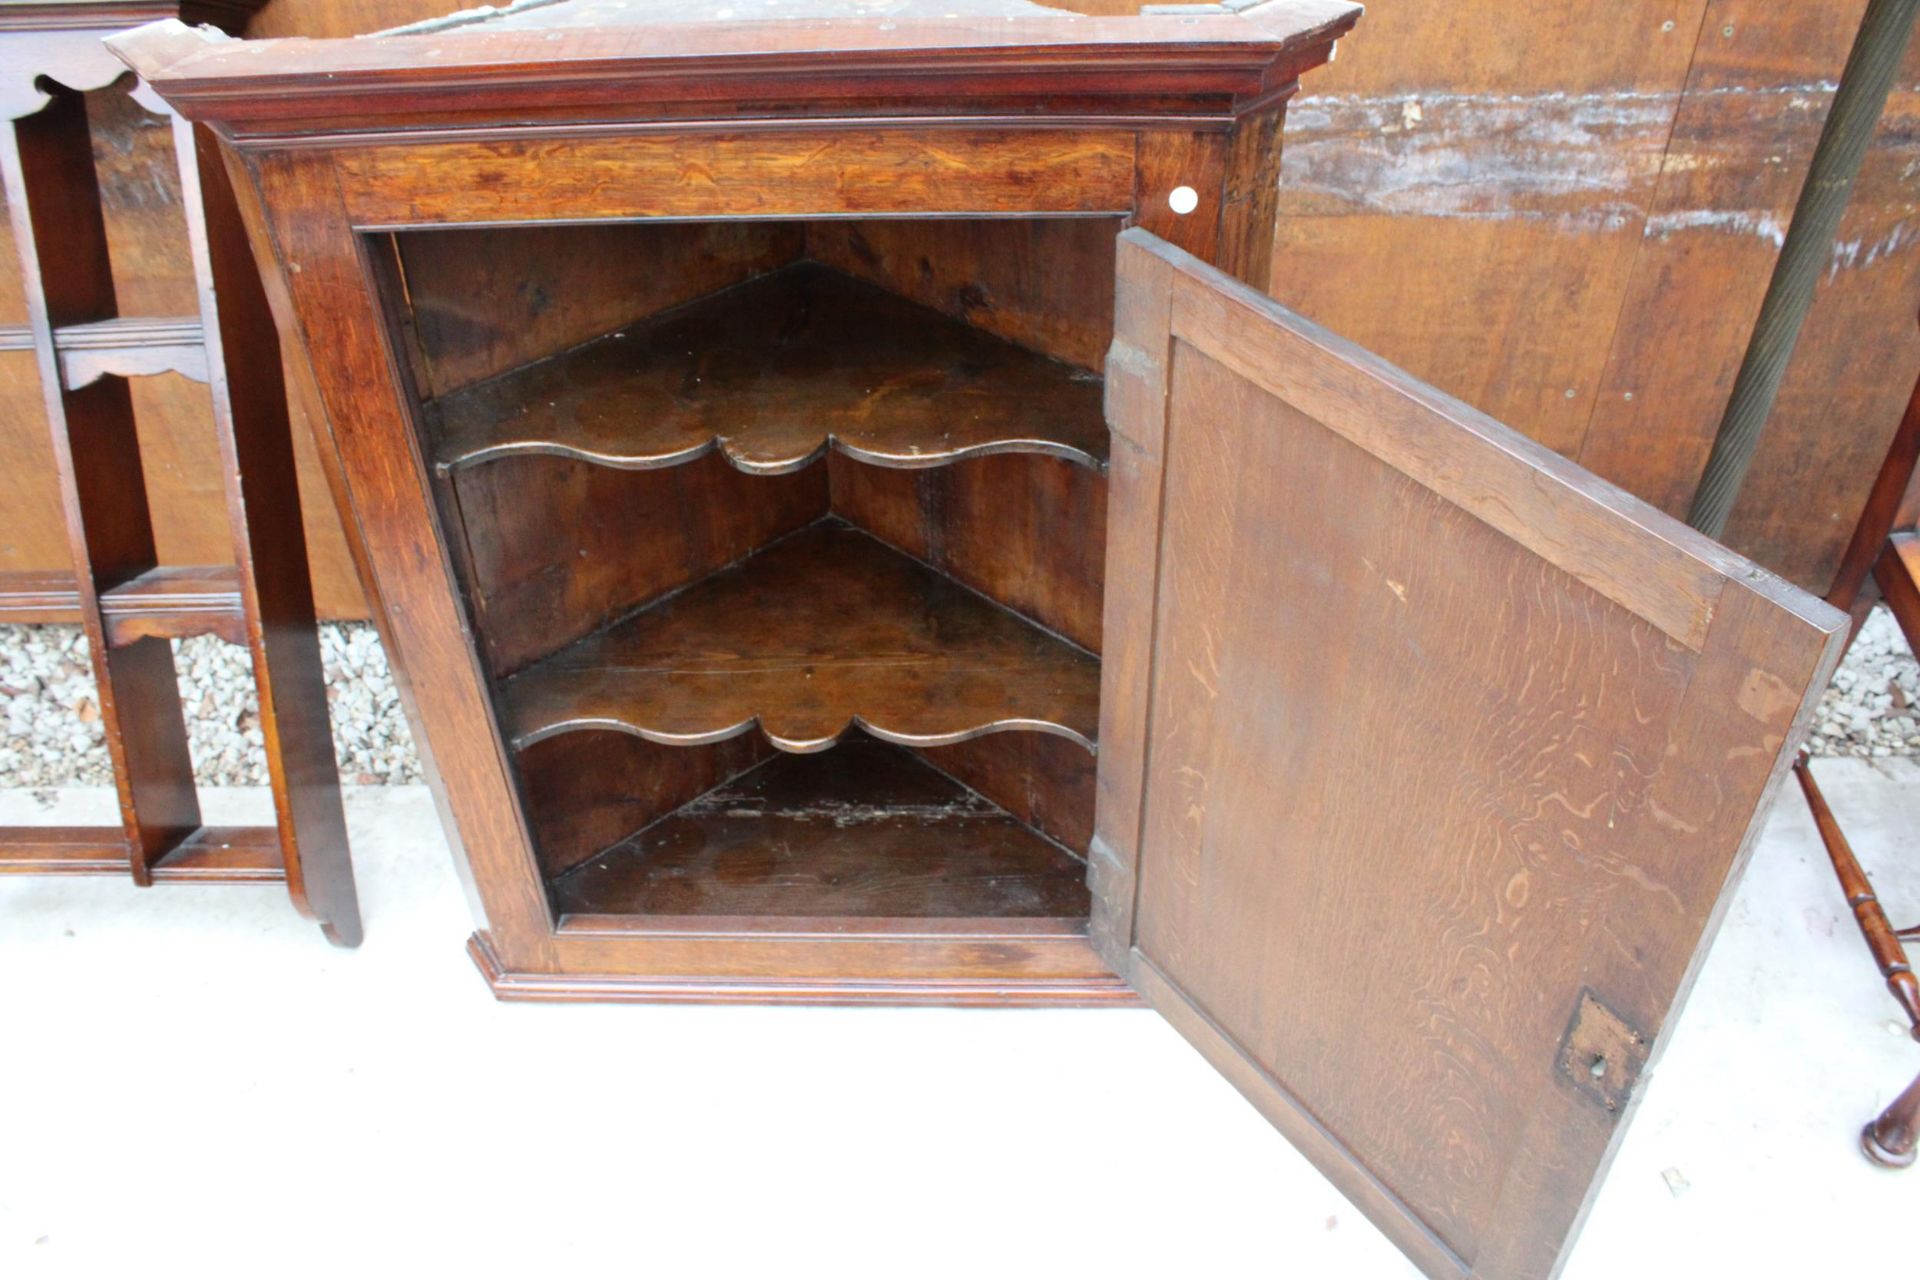 AN OAK AND CROSSBANDED GEORGE III CORNER CUPBOARD WITH STHAPED INTERIOR SHELVES 35" WIDE - Image 3 of 3